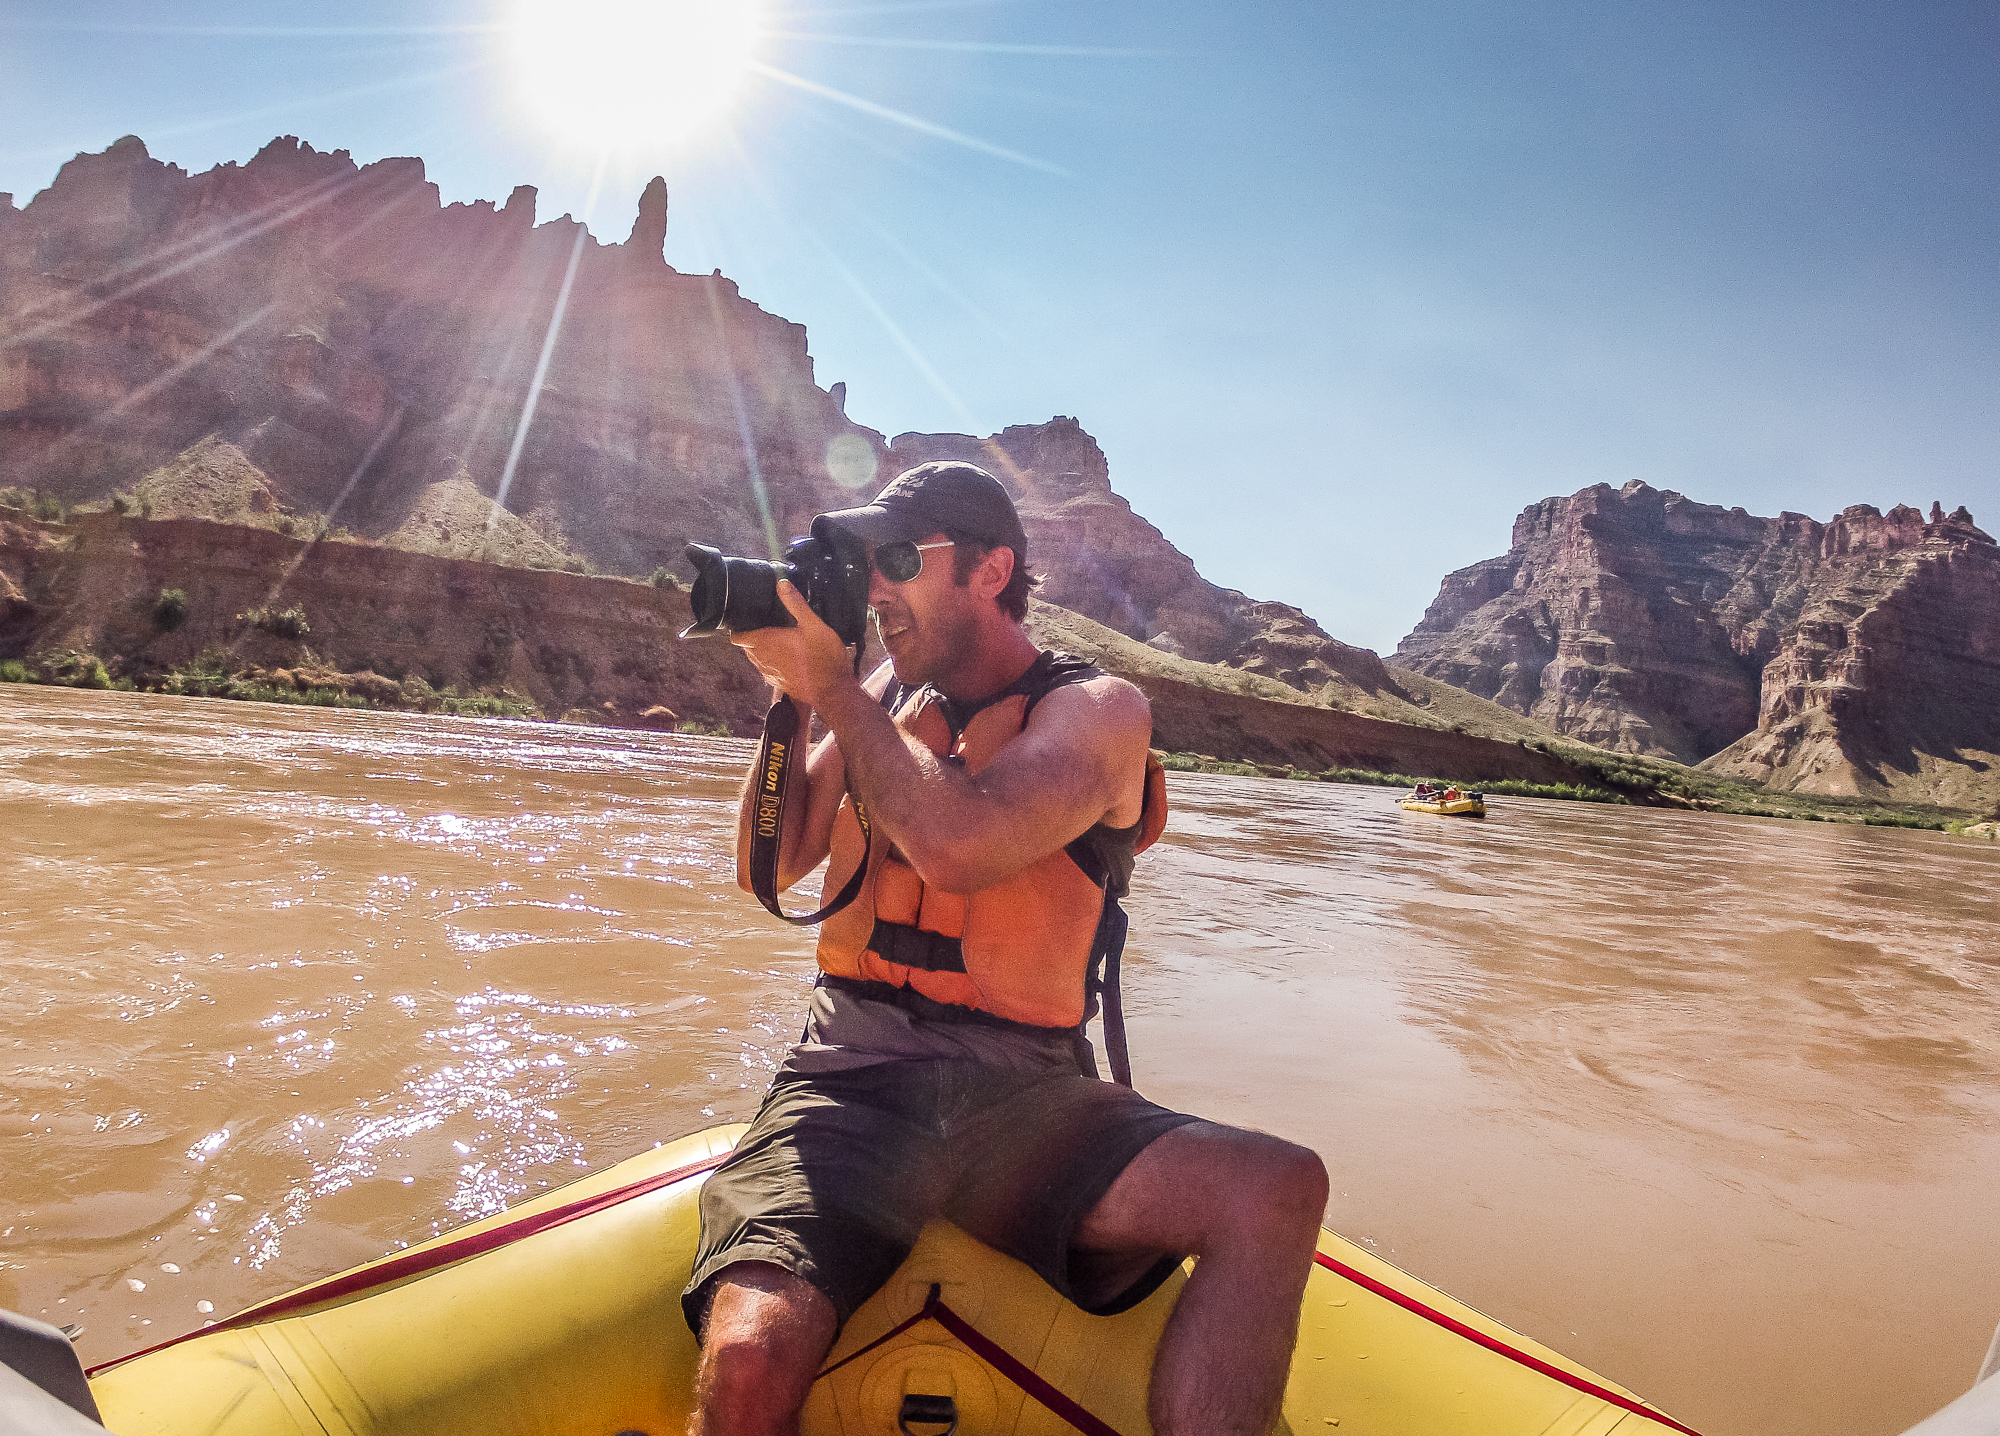 The Best Camera Gear for River Trips